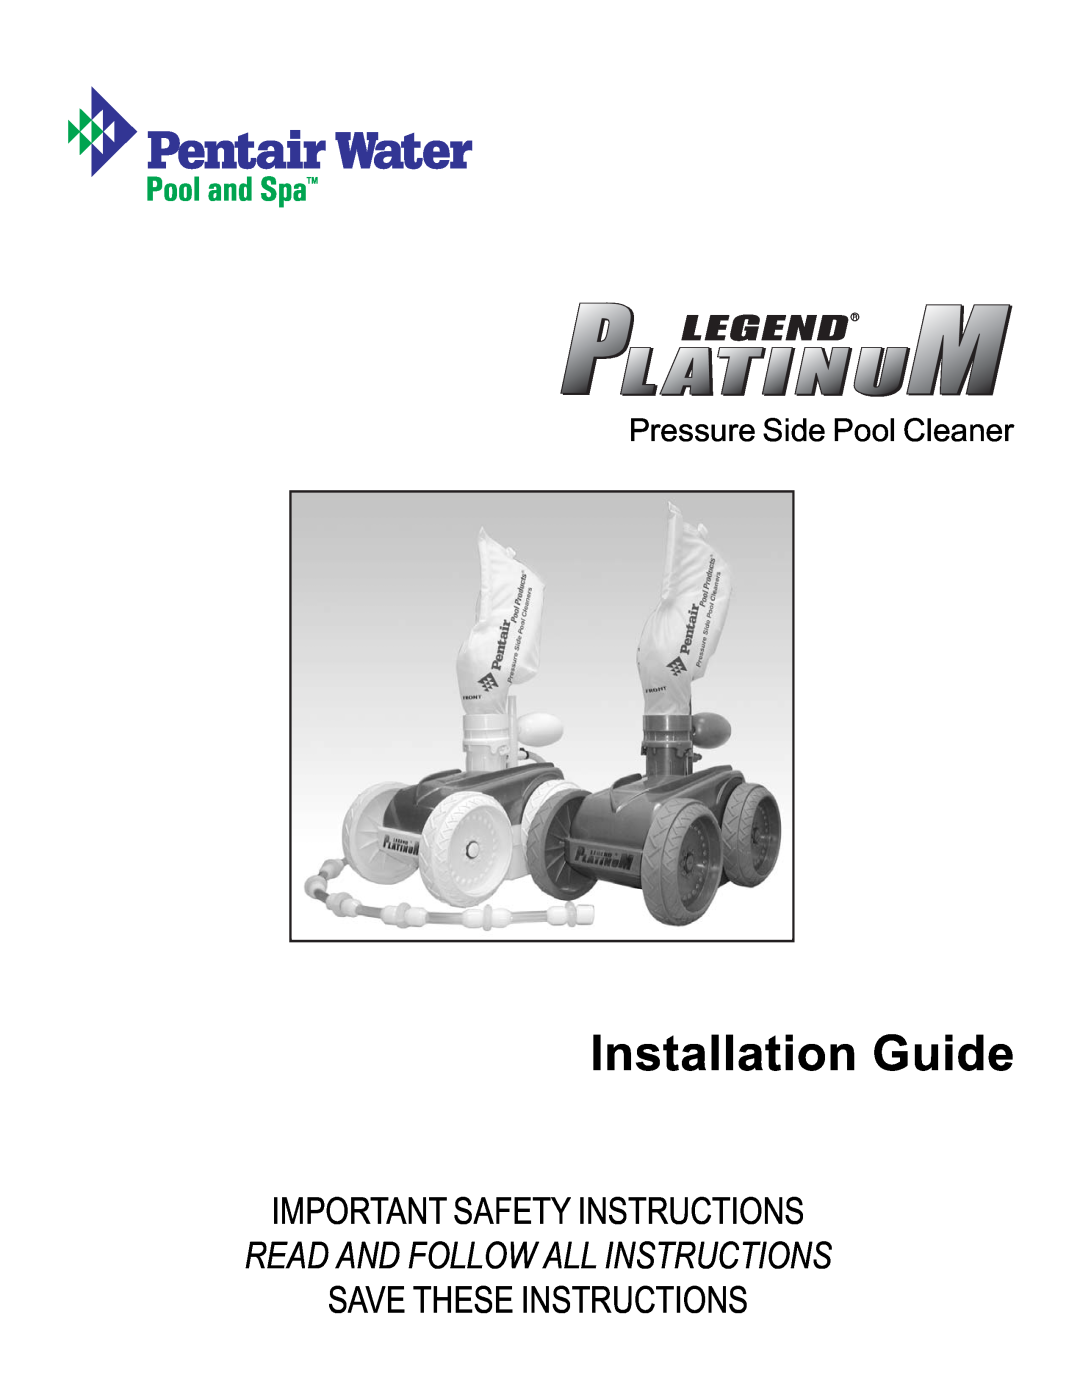 Pentair installation manual Pressure Side Pool Cleaner, Installation Guide, Important Safety Instructions 